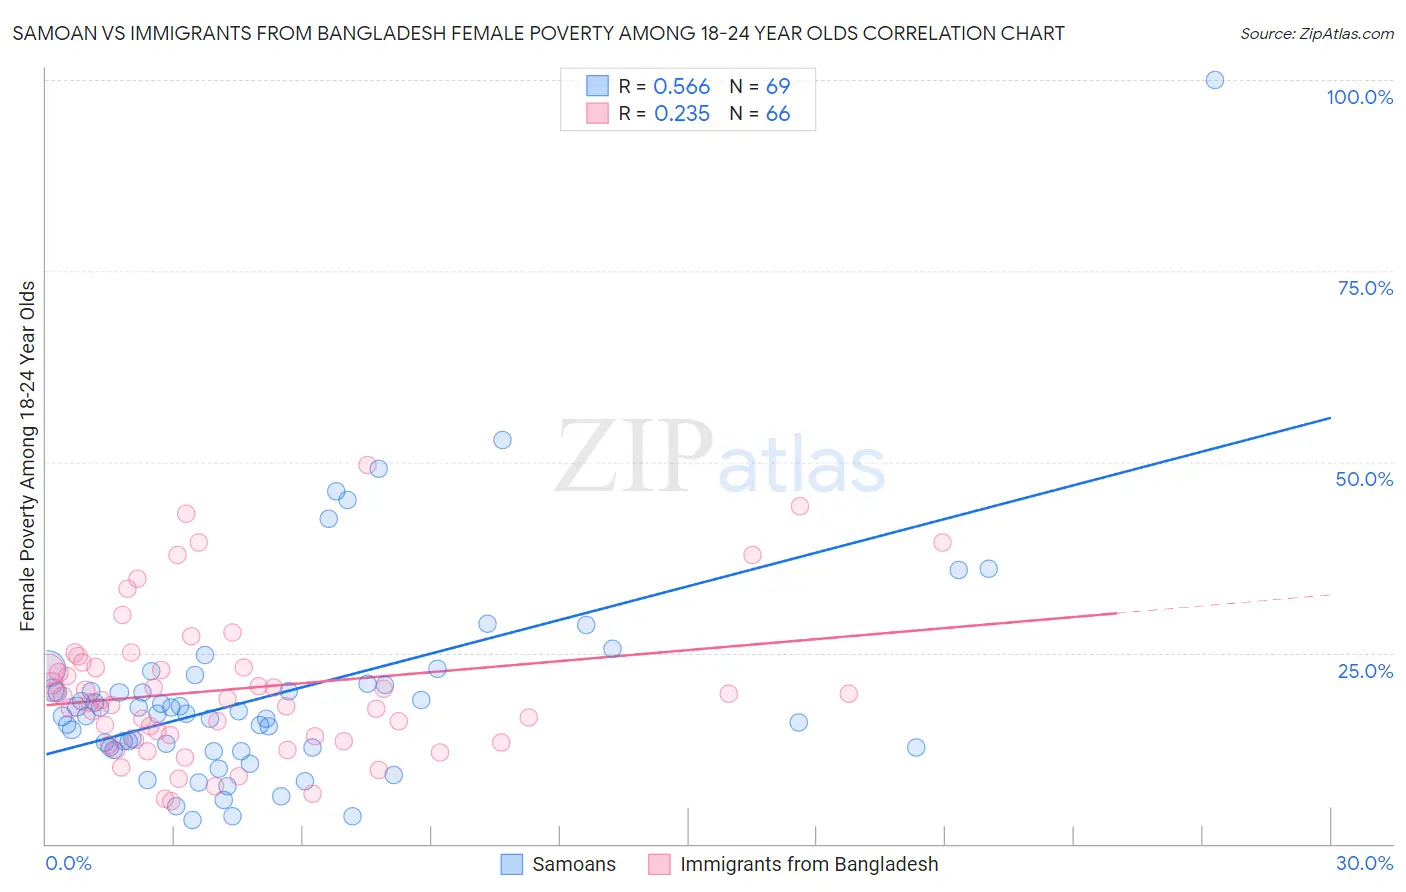 Samoan vs Immigrants from Bangladesh Female Poverty Among 18-24 Year Olds